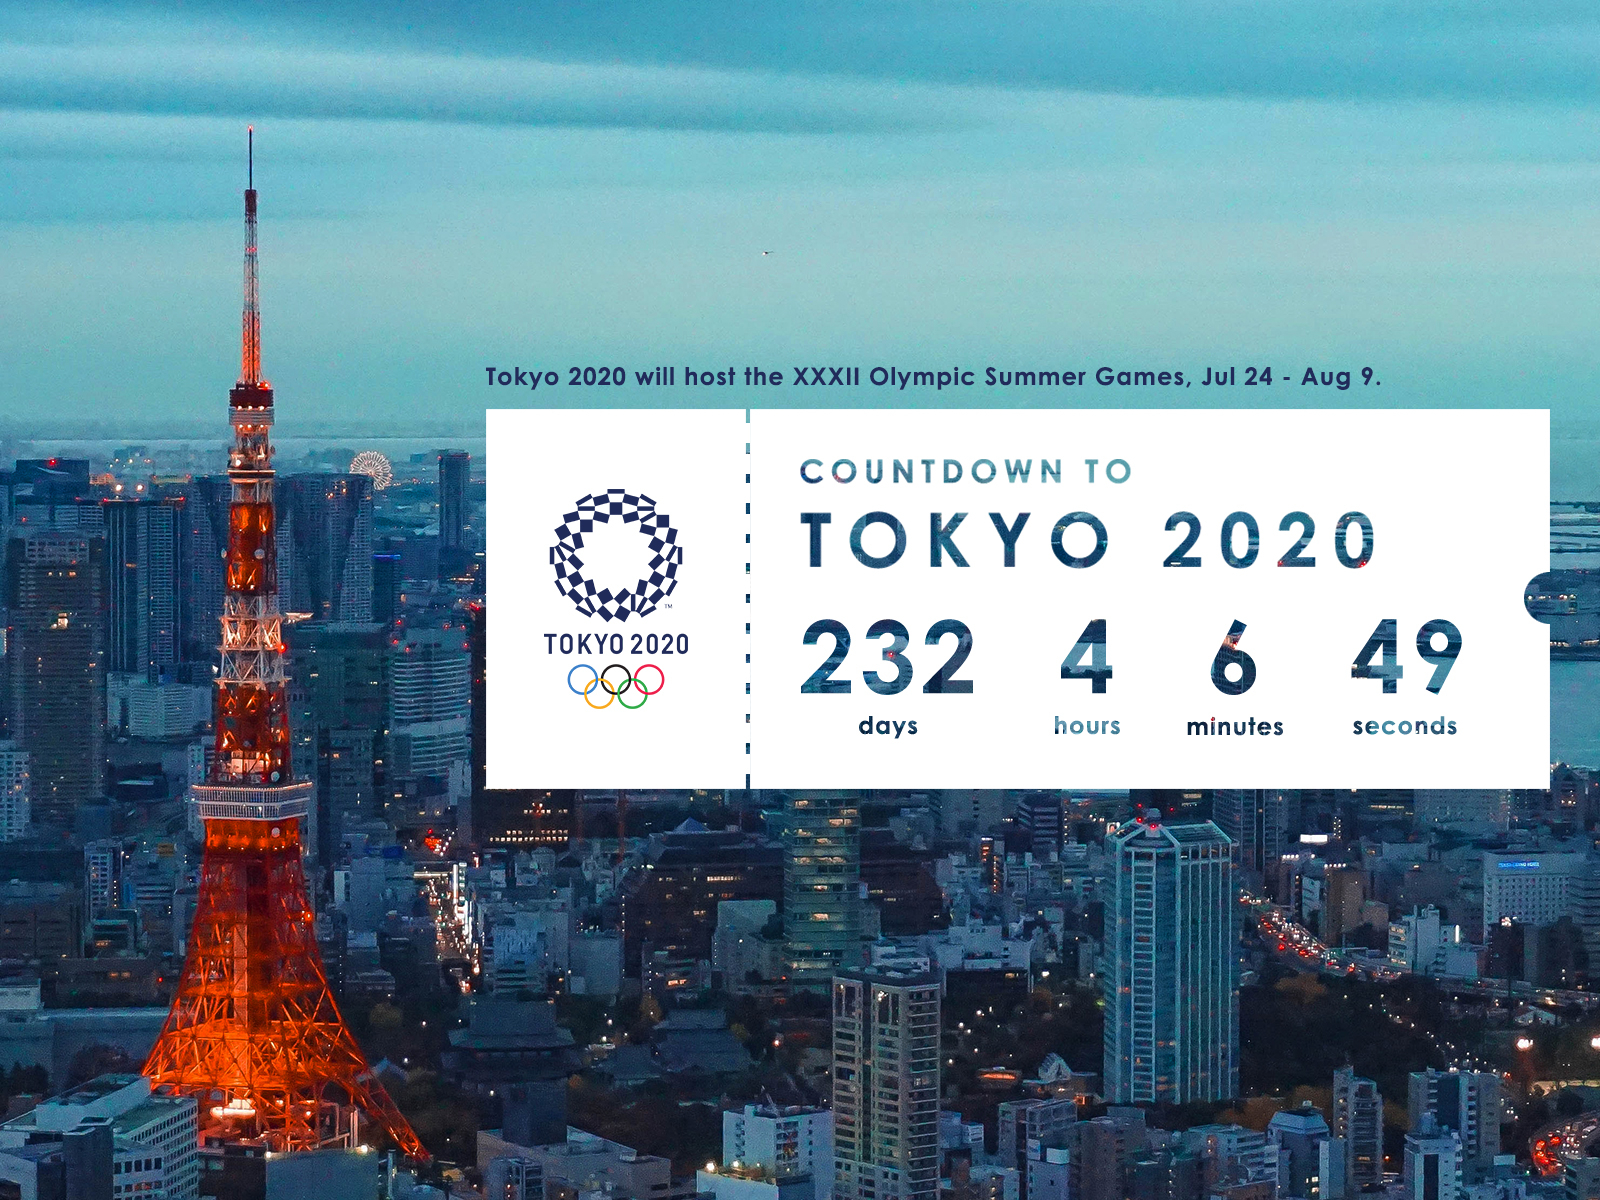 Countdown Timer by Noriko G on Dribbble